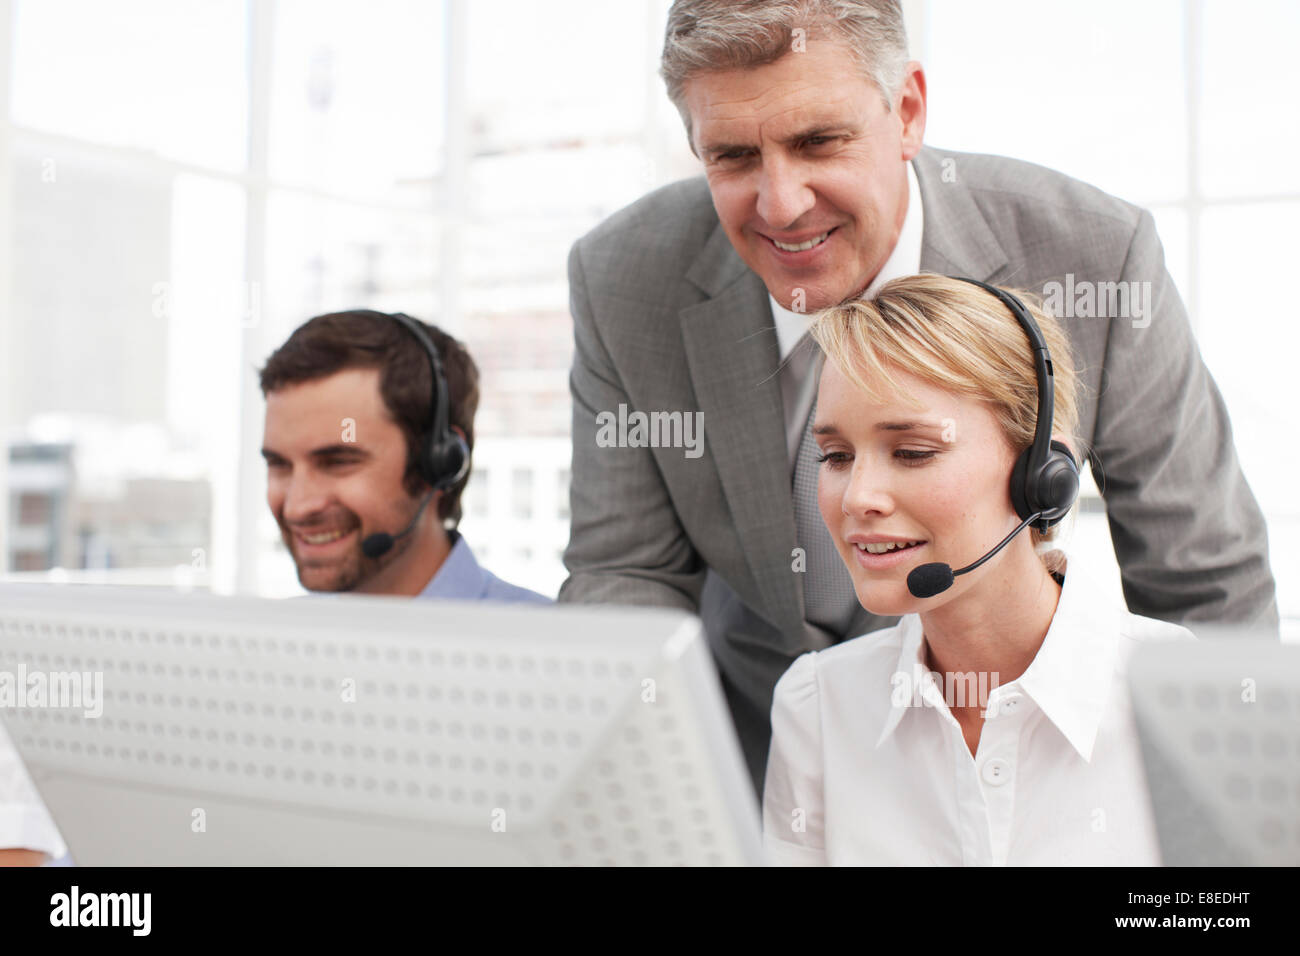 Happy people at work Stock Photo